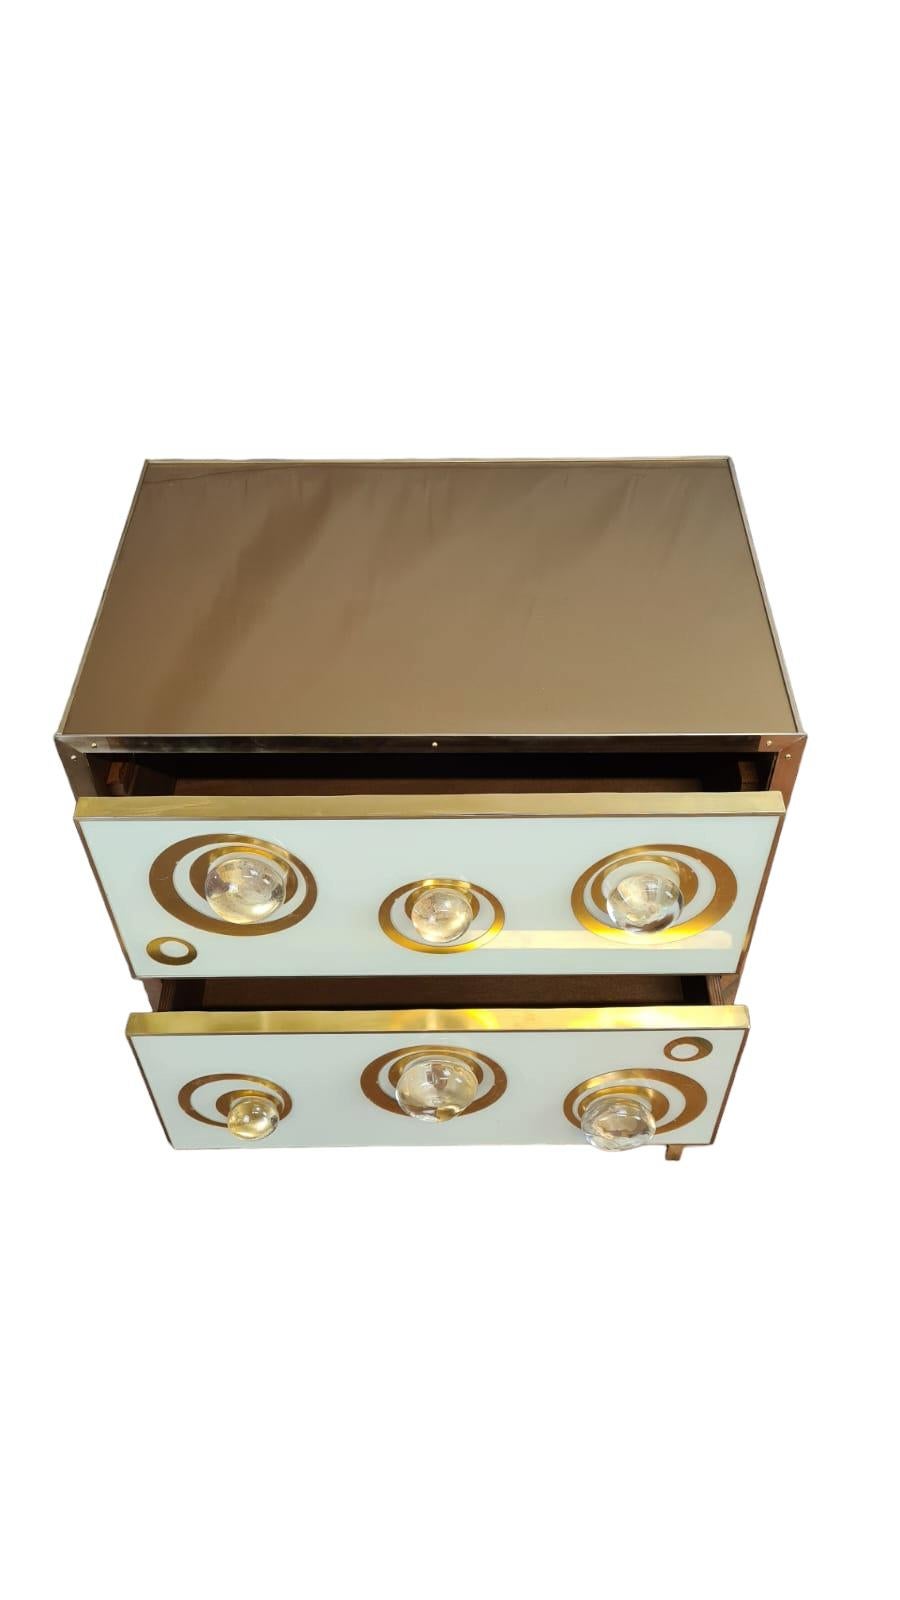 Imagine walking into a tastefully decorated room and immediately noticing two beautiful white and gold bedside tables that catch the eye with their refined elegance.  

The nightstand drawers are made of Murano glass fusion, with craftsmanship that